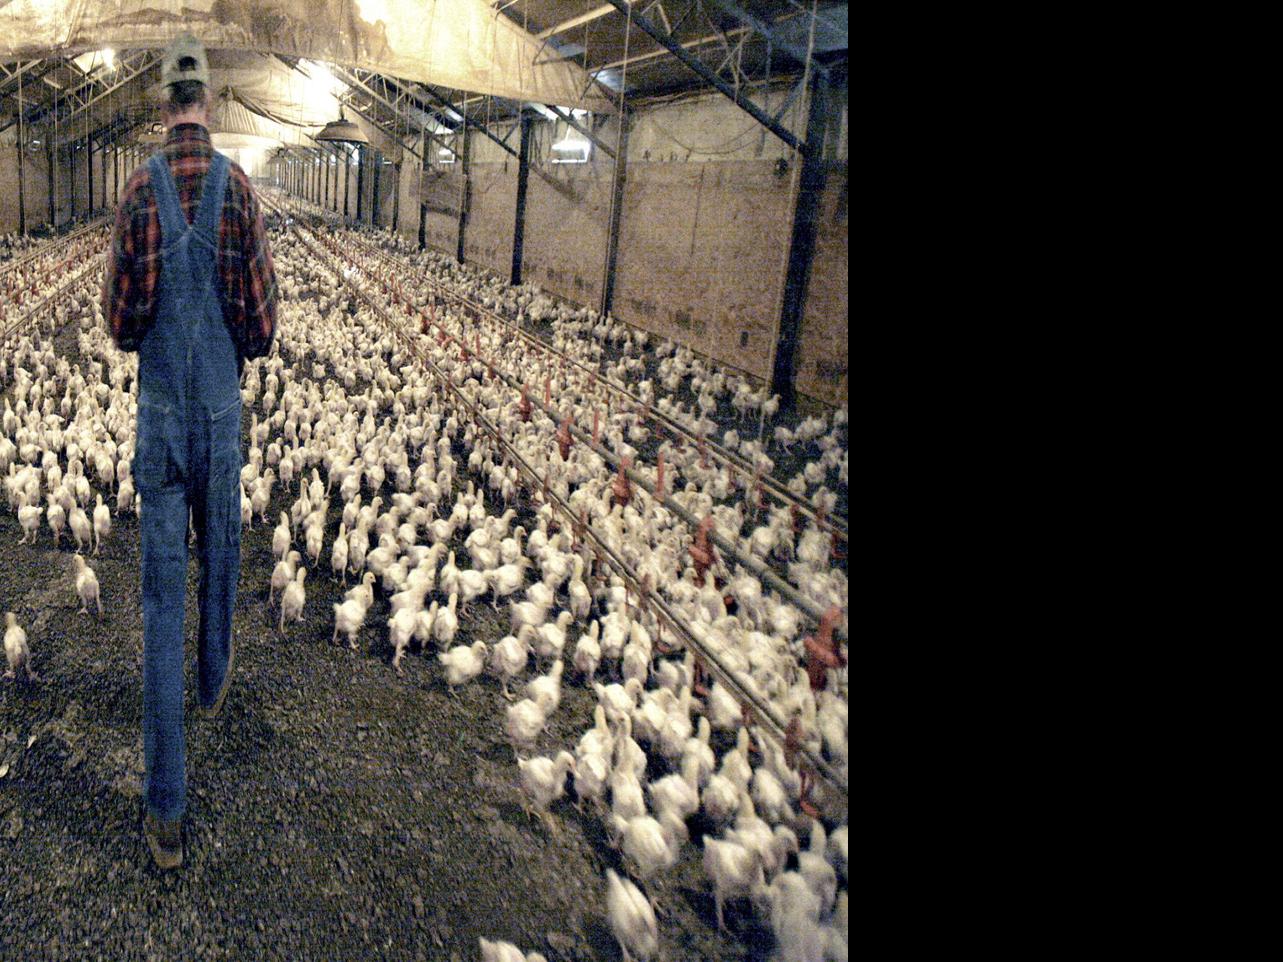 Fowl play: the chicken farmers being bullied by big poultry, Guardian  sustainable business